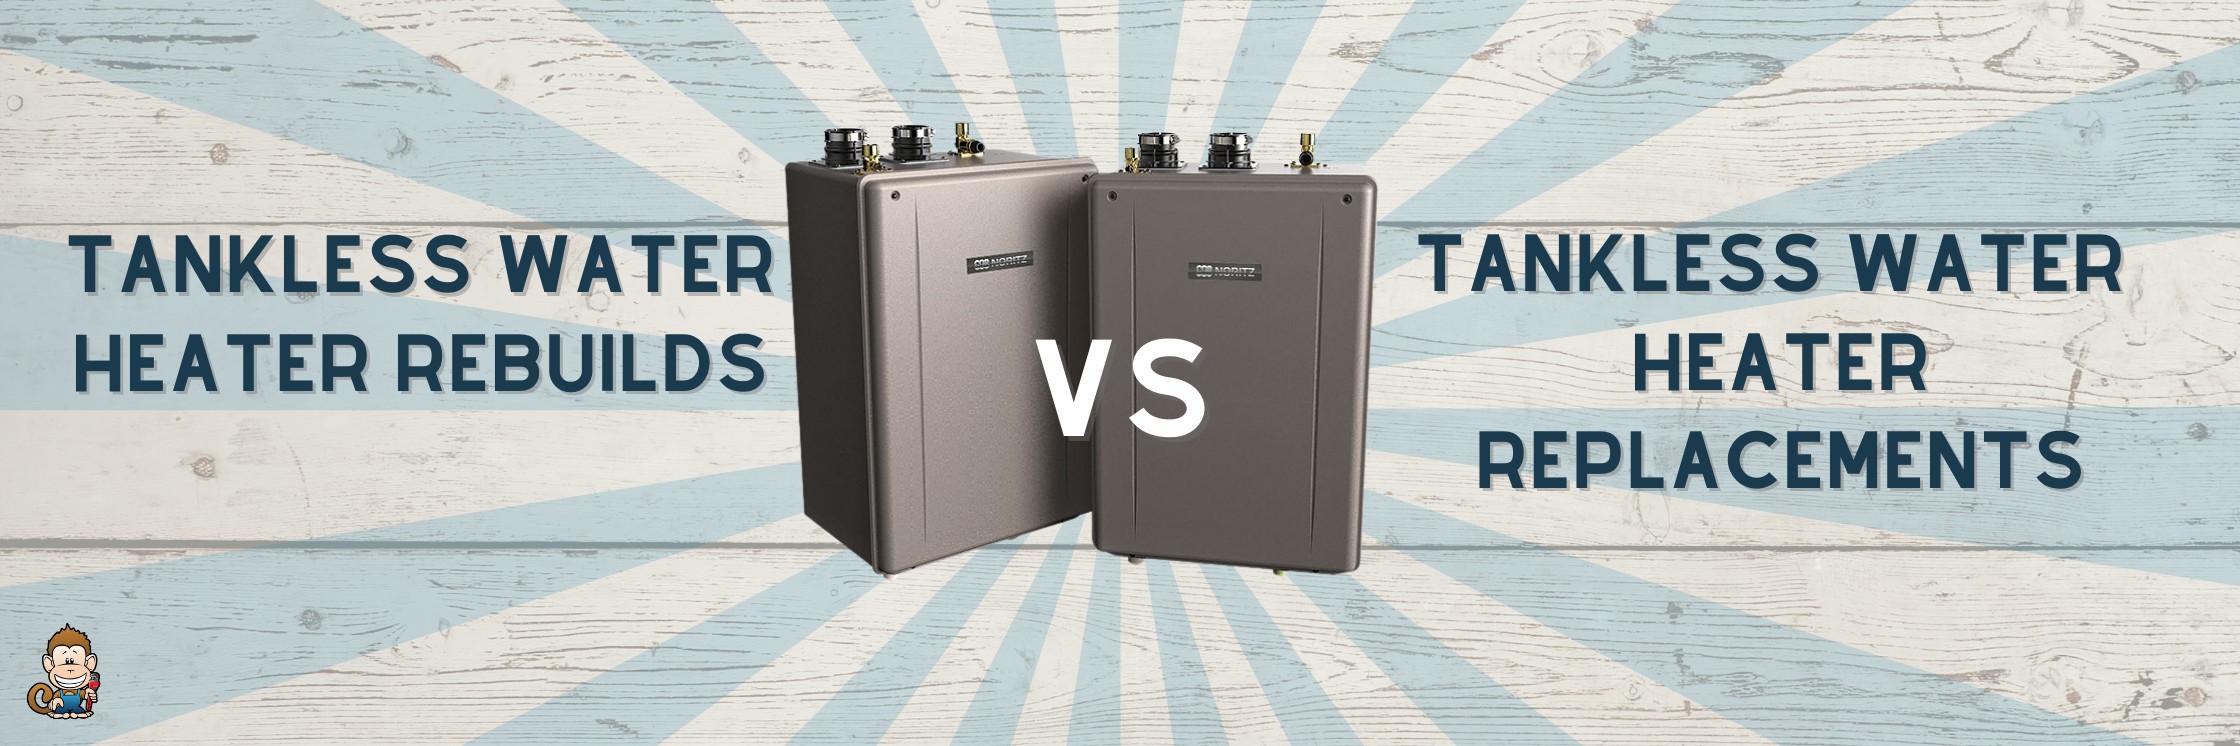 Tankless Water Heater Rebuild vs Tankless Water Heater Replacement